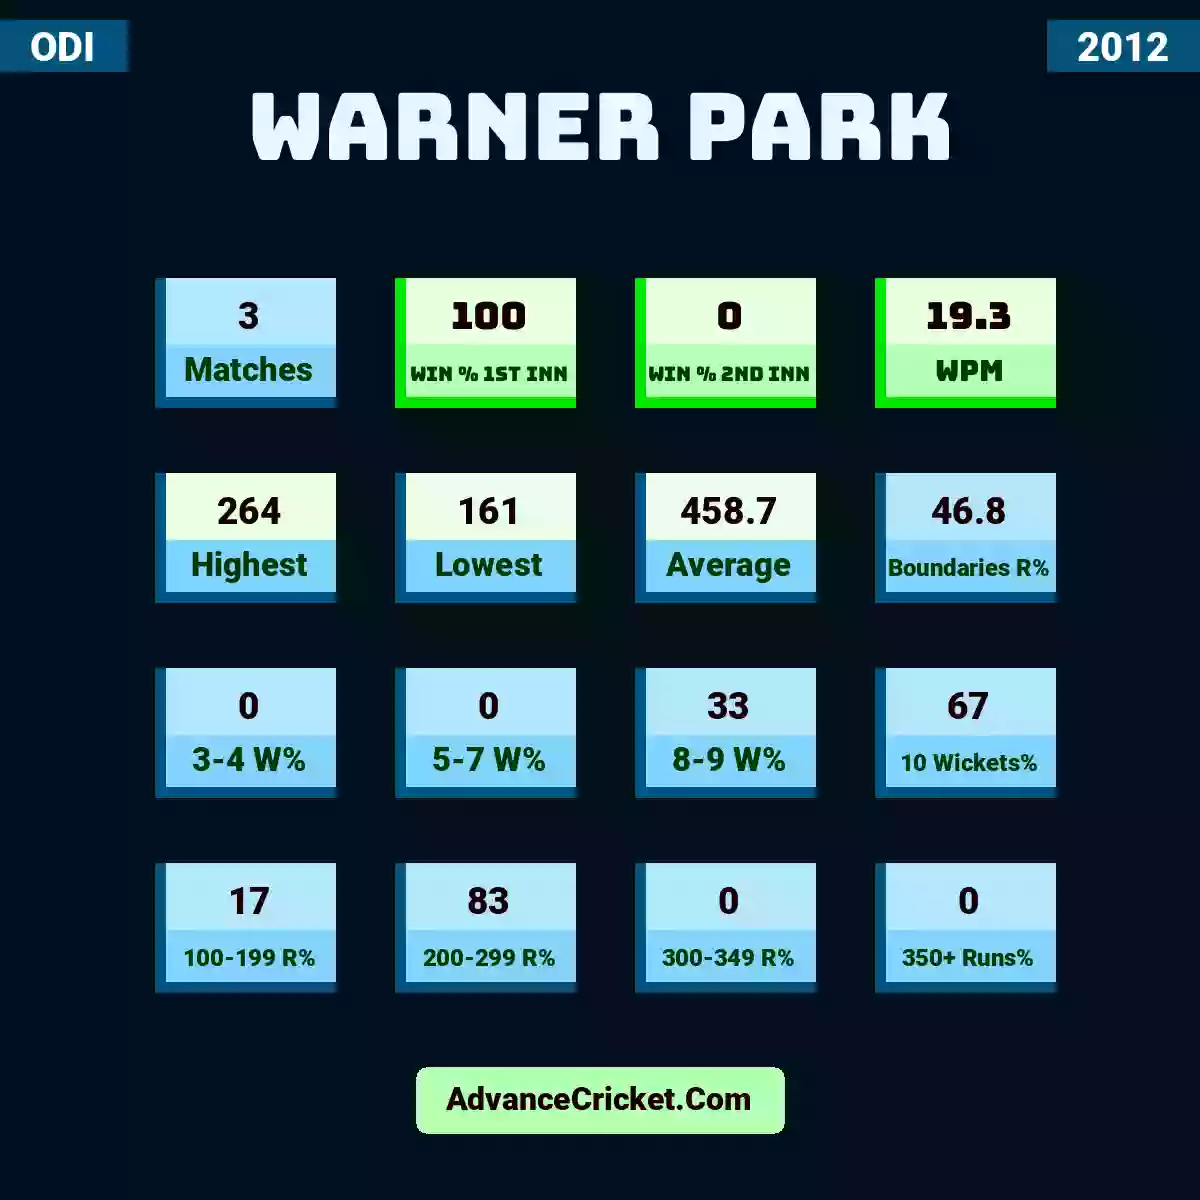 Image showing Warner Park with Matches: 3, Win % 1st Inn: 100, Win % 2nd Inn: 0, WPM: 19.3, Highest: 264, Lowest: 161, Average: 458.7, Boundaries R%: 46.8, 3-4 W%: 0, 5-7 W%: 0, 8-9 W%: 33, 10 Wickets%: 67, 100-199 R%: 17, 200-299 R%: 83, 300-349 R%: 0, 350+ Runs%: 0.